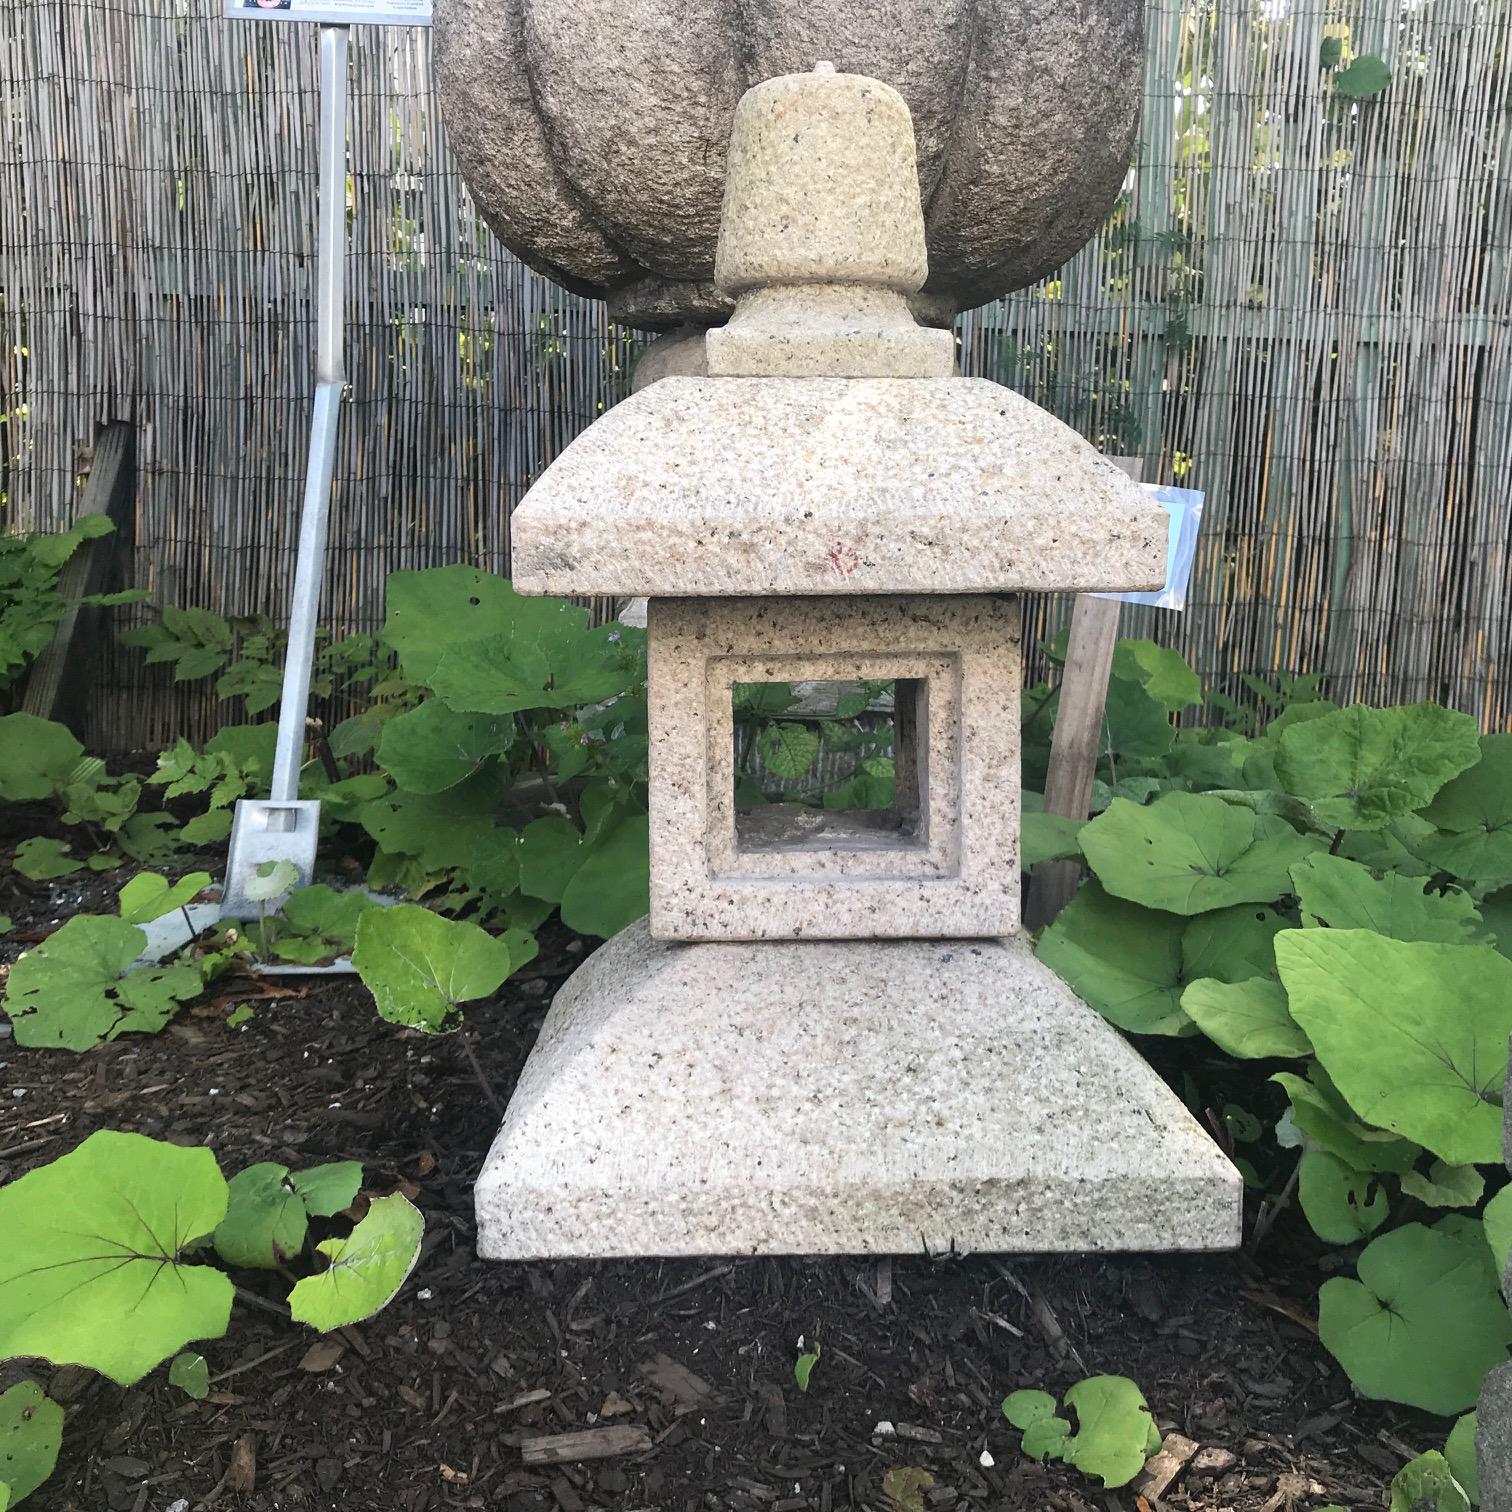 Japan, a fine easily portable hand-carved granite stone tea lantern with square roof measures 24 inches high and 13 inches wide, Showa period 1940s-1950s. 

Carved from solid granite by Japanese specialized artisans over 50 years ago. This is a